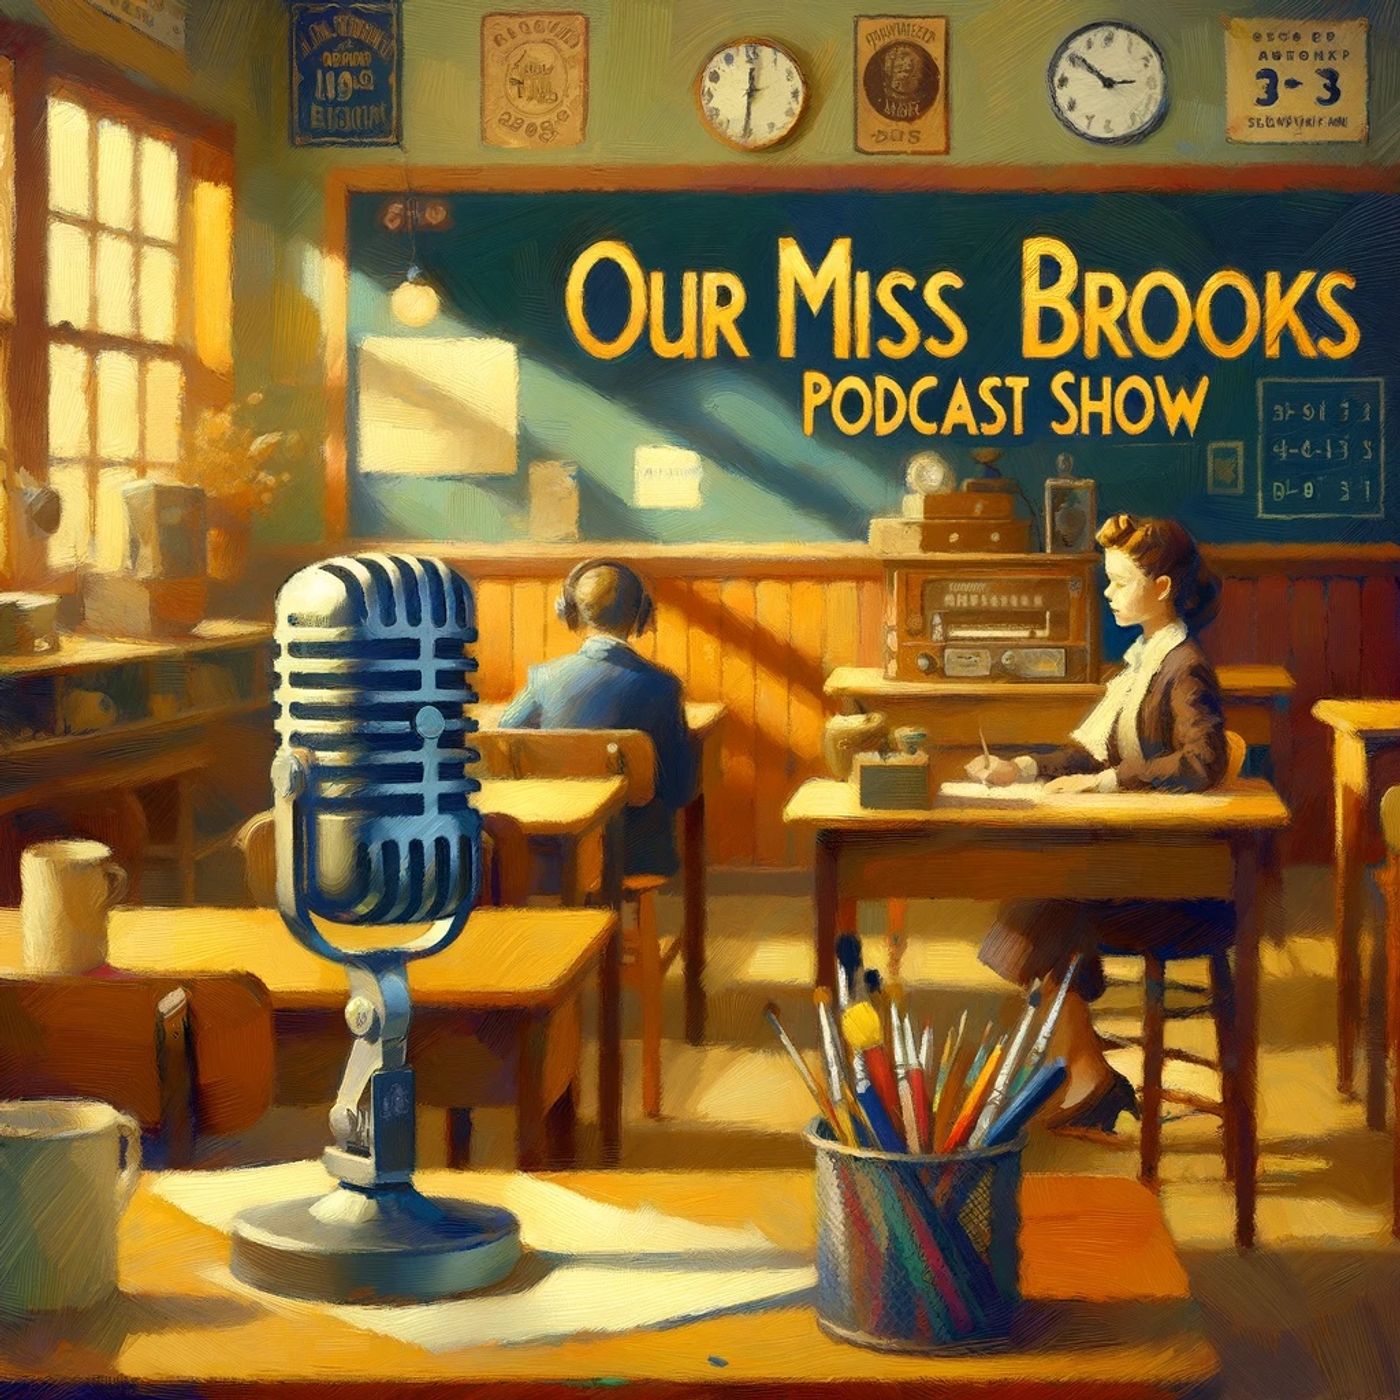 New Efficiency Crackdown an episode of Our Miss Brooks